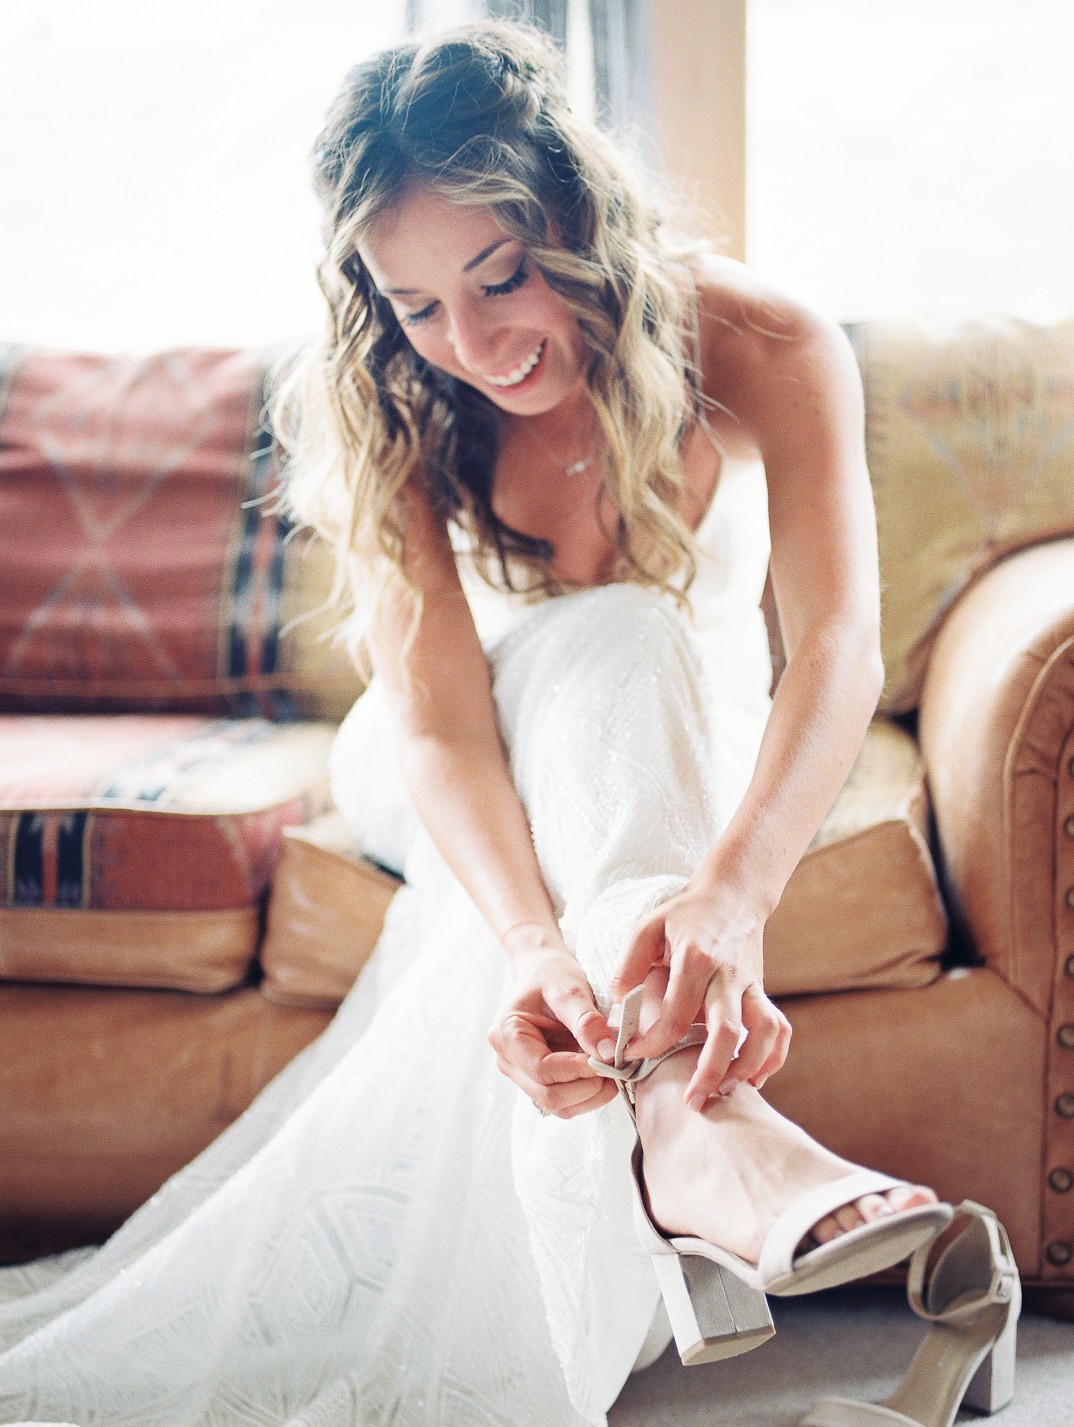 10 tips for a stress-free wedding day